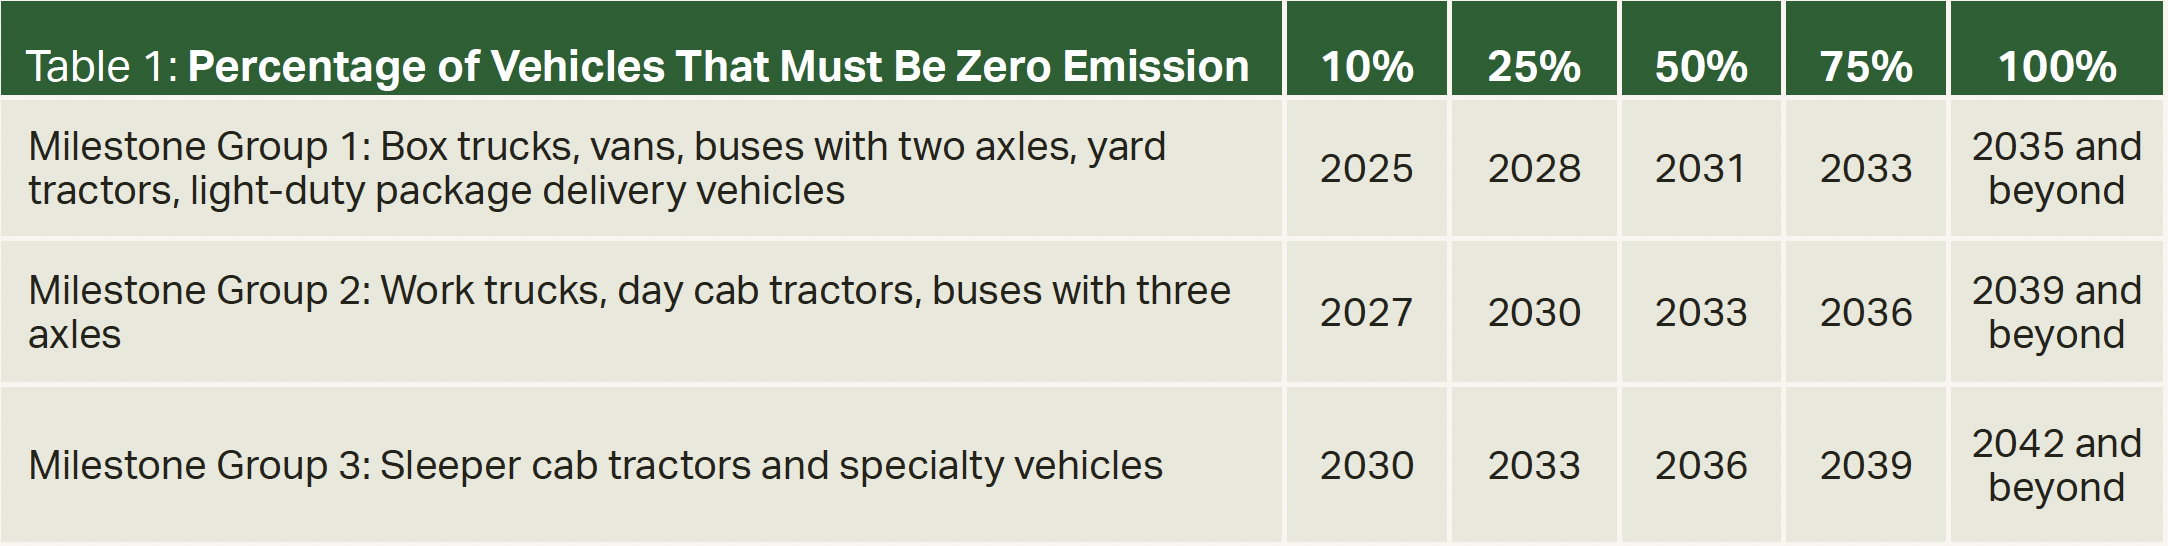 Table 1: Percentage of Vehicles That Must Be Zero Emission